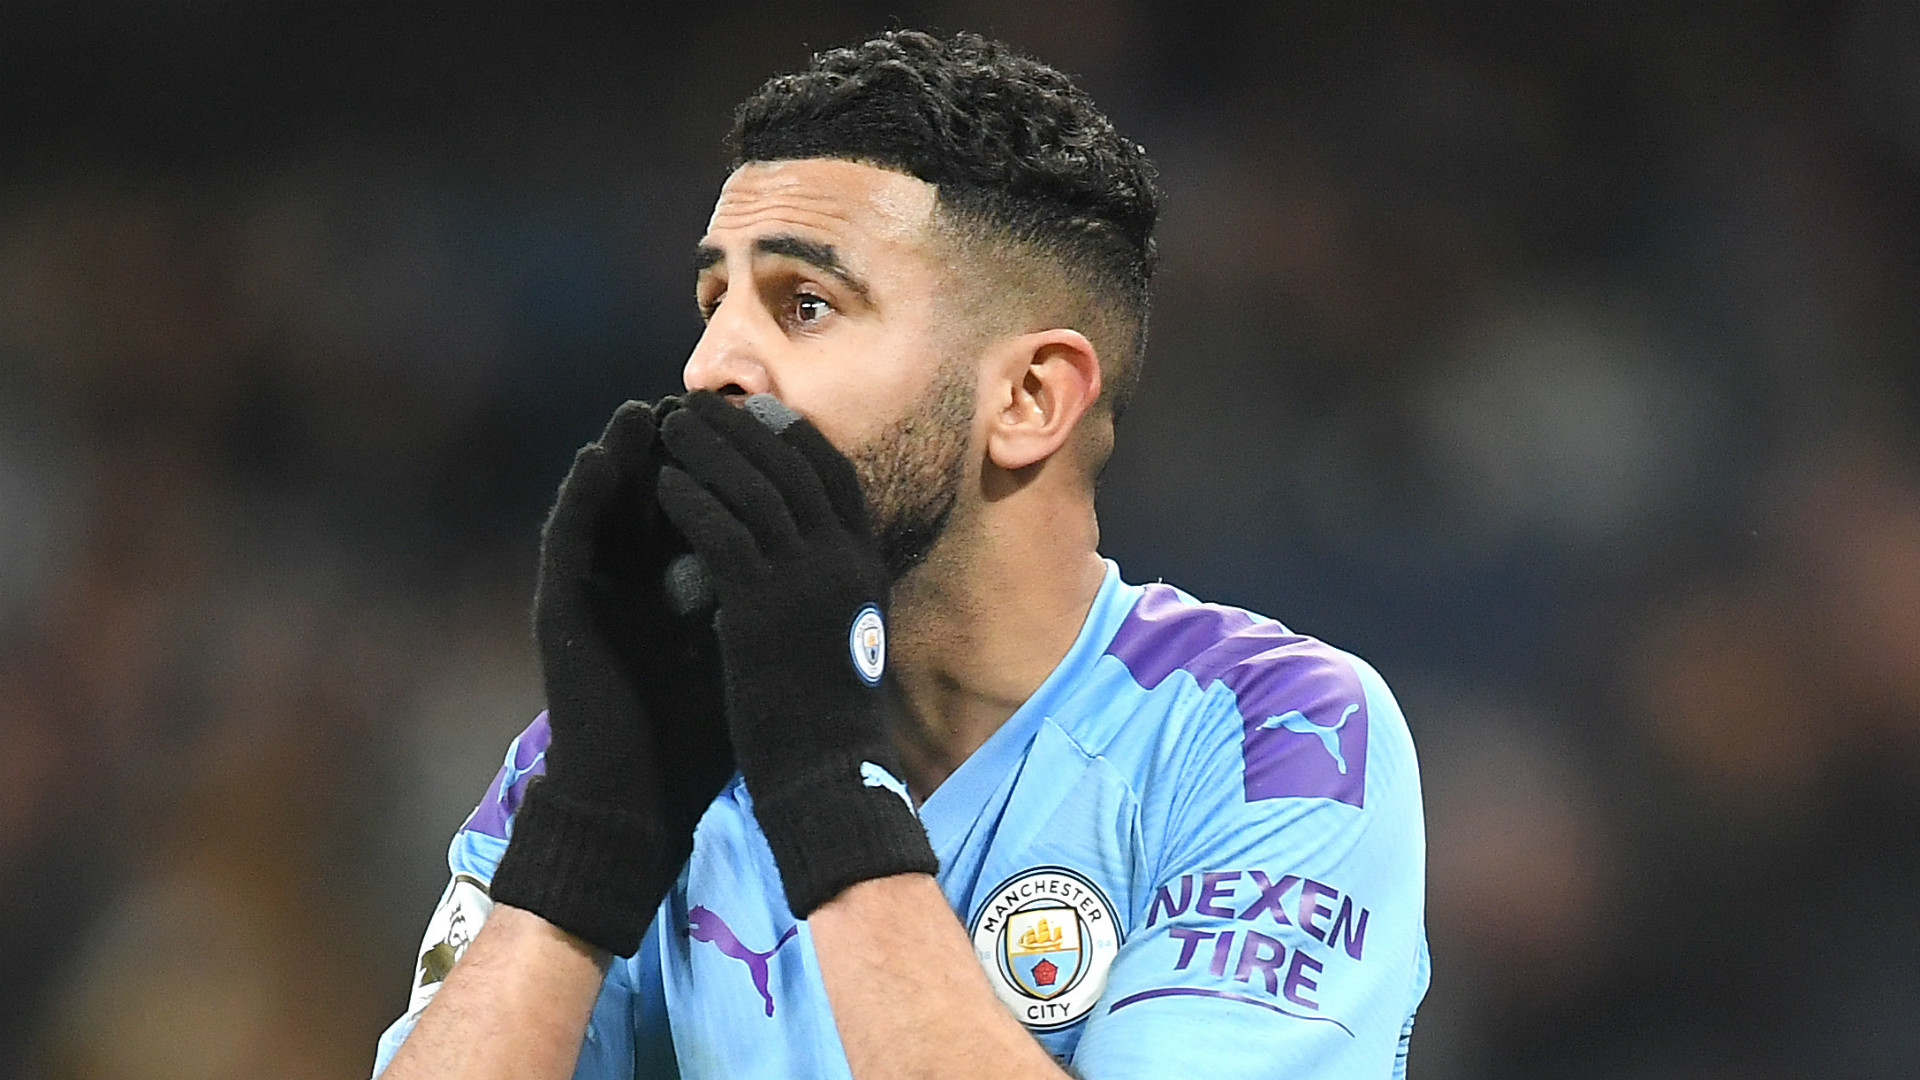 Mahrez was missed by Algeria when Man City hosted Liverpool - Belmadi